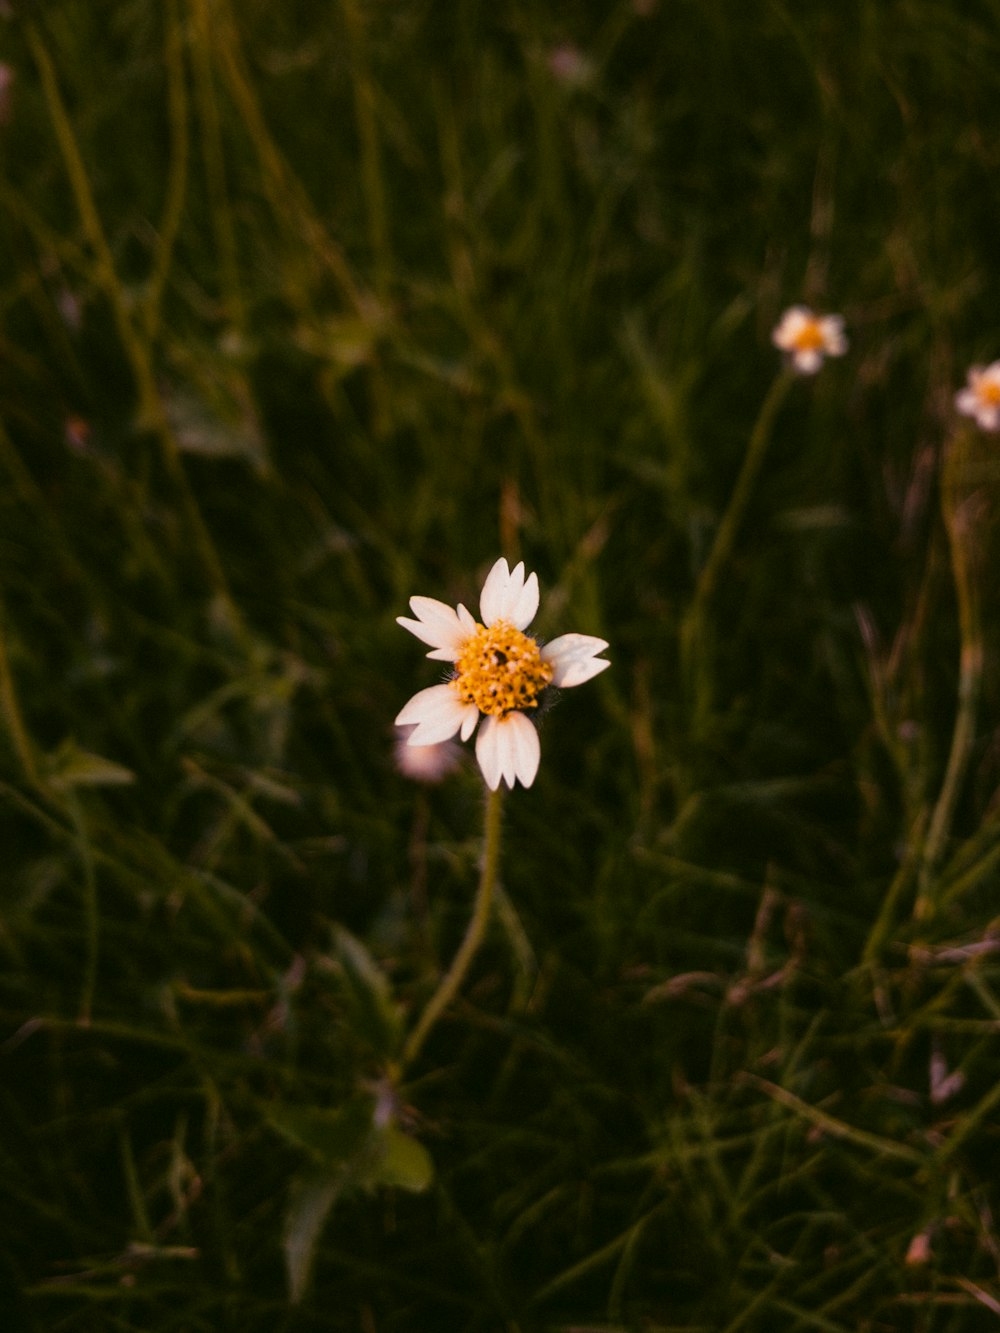 a white flower with a yellow center in a field of grass